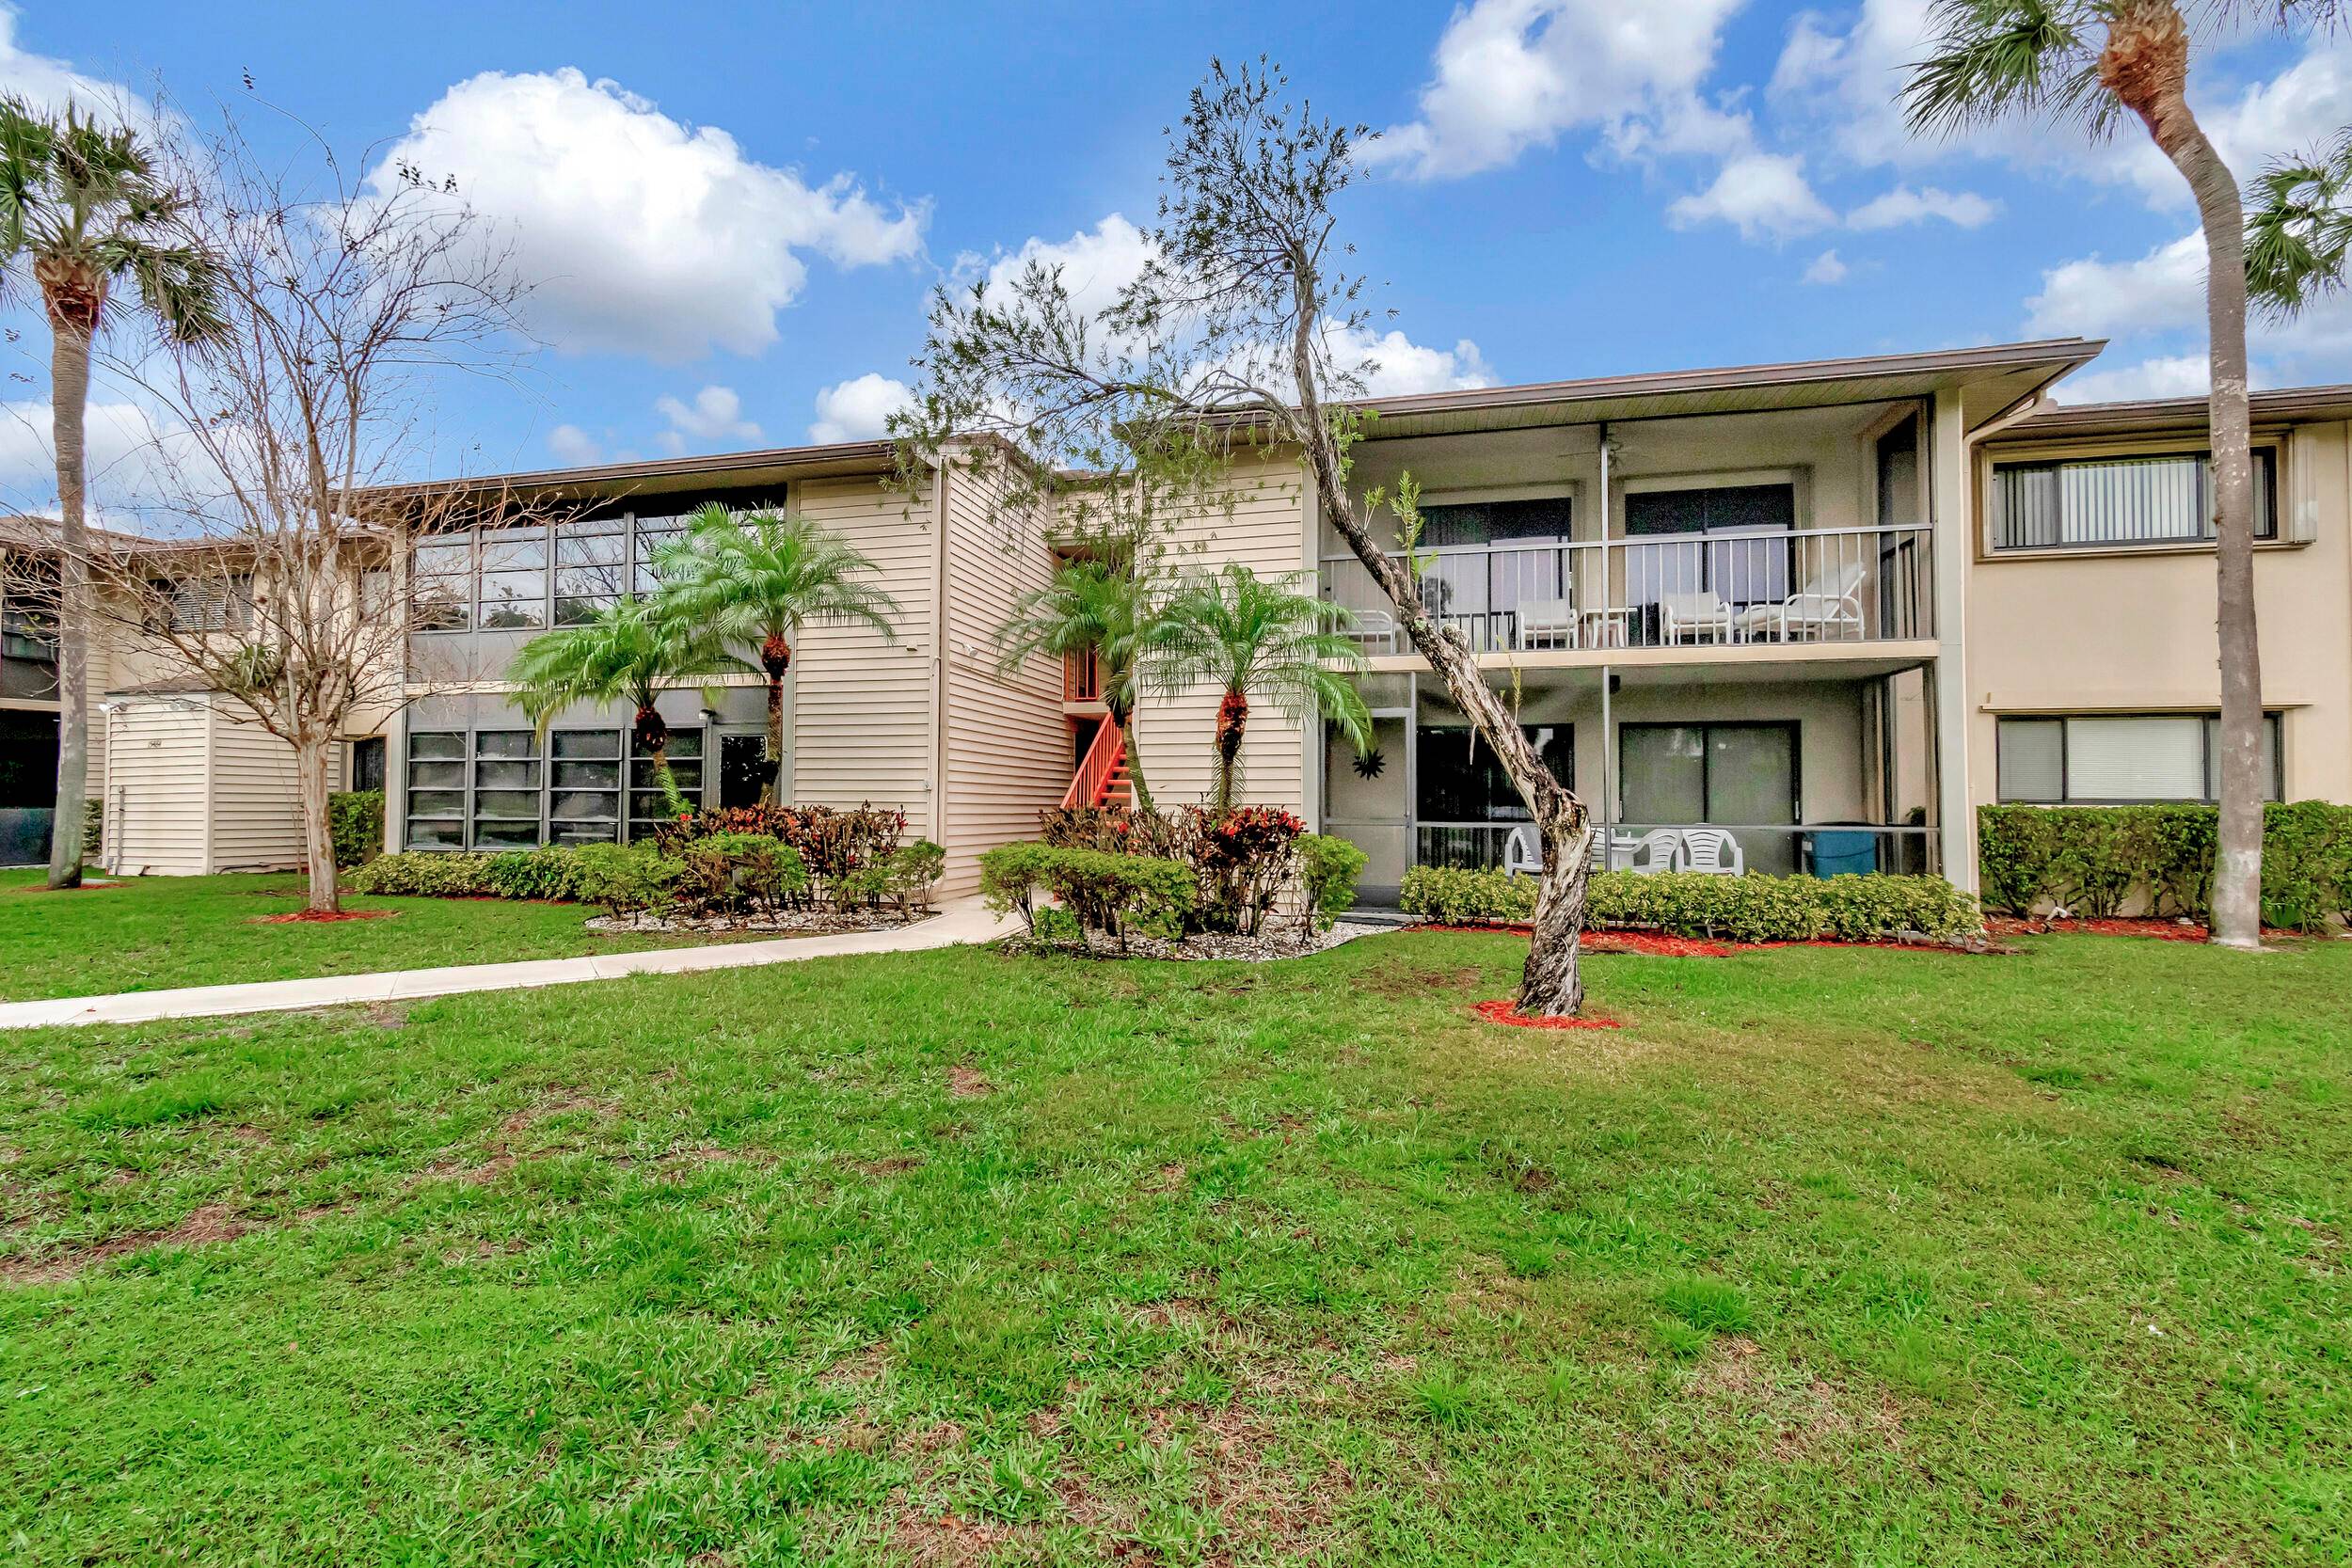 Find exceptionally elegant living in this move in ready ground floor condominium in tranquil Lakes of Delray.